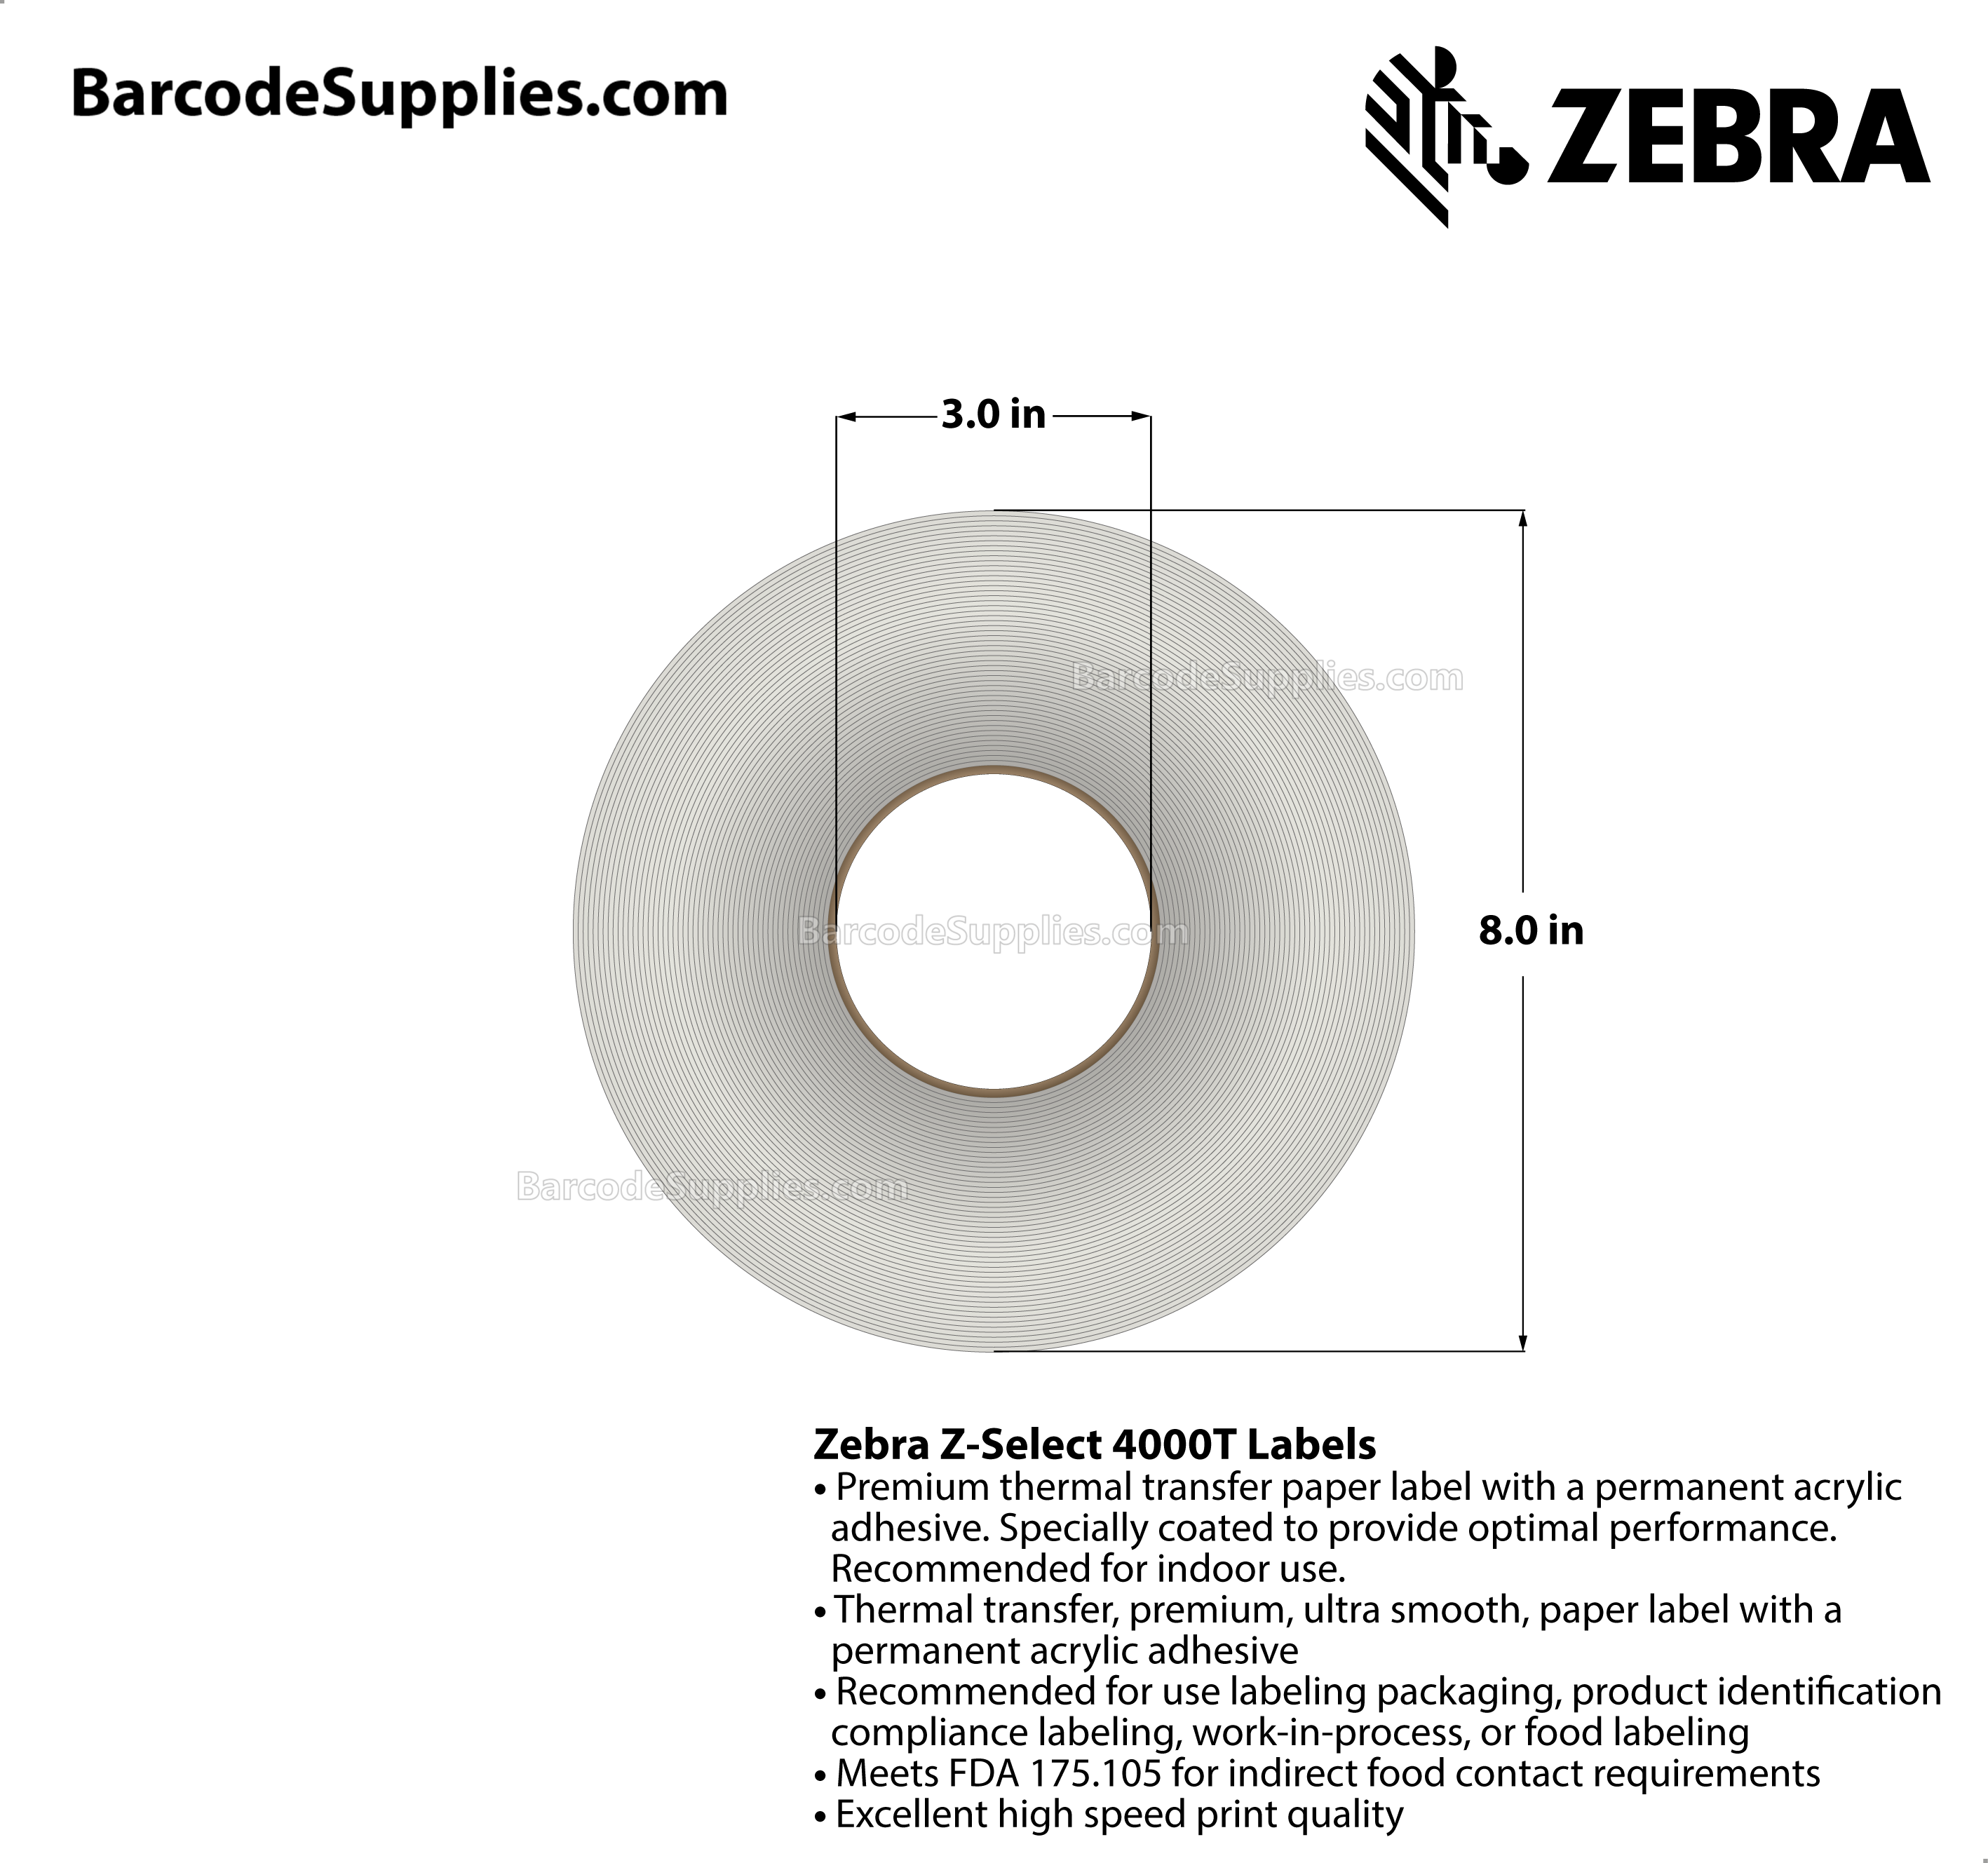 3.5 x 1 Thermal Transfer White Z-Select 4000T Labels With Permanent Adhesive - Not Perforated - 5180 Labels Per Roll - Carton Of 6 Rolls - 31080 Labels Total - MPN: 72288